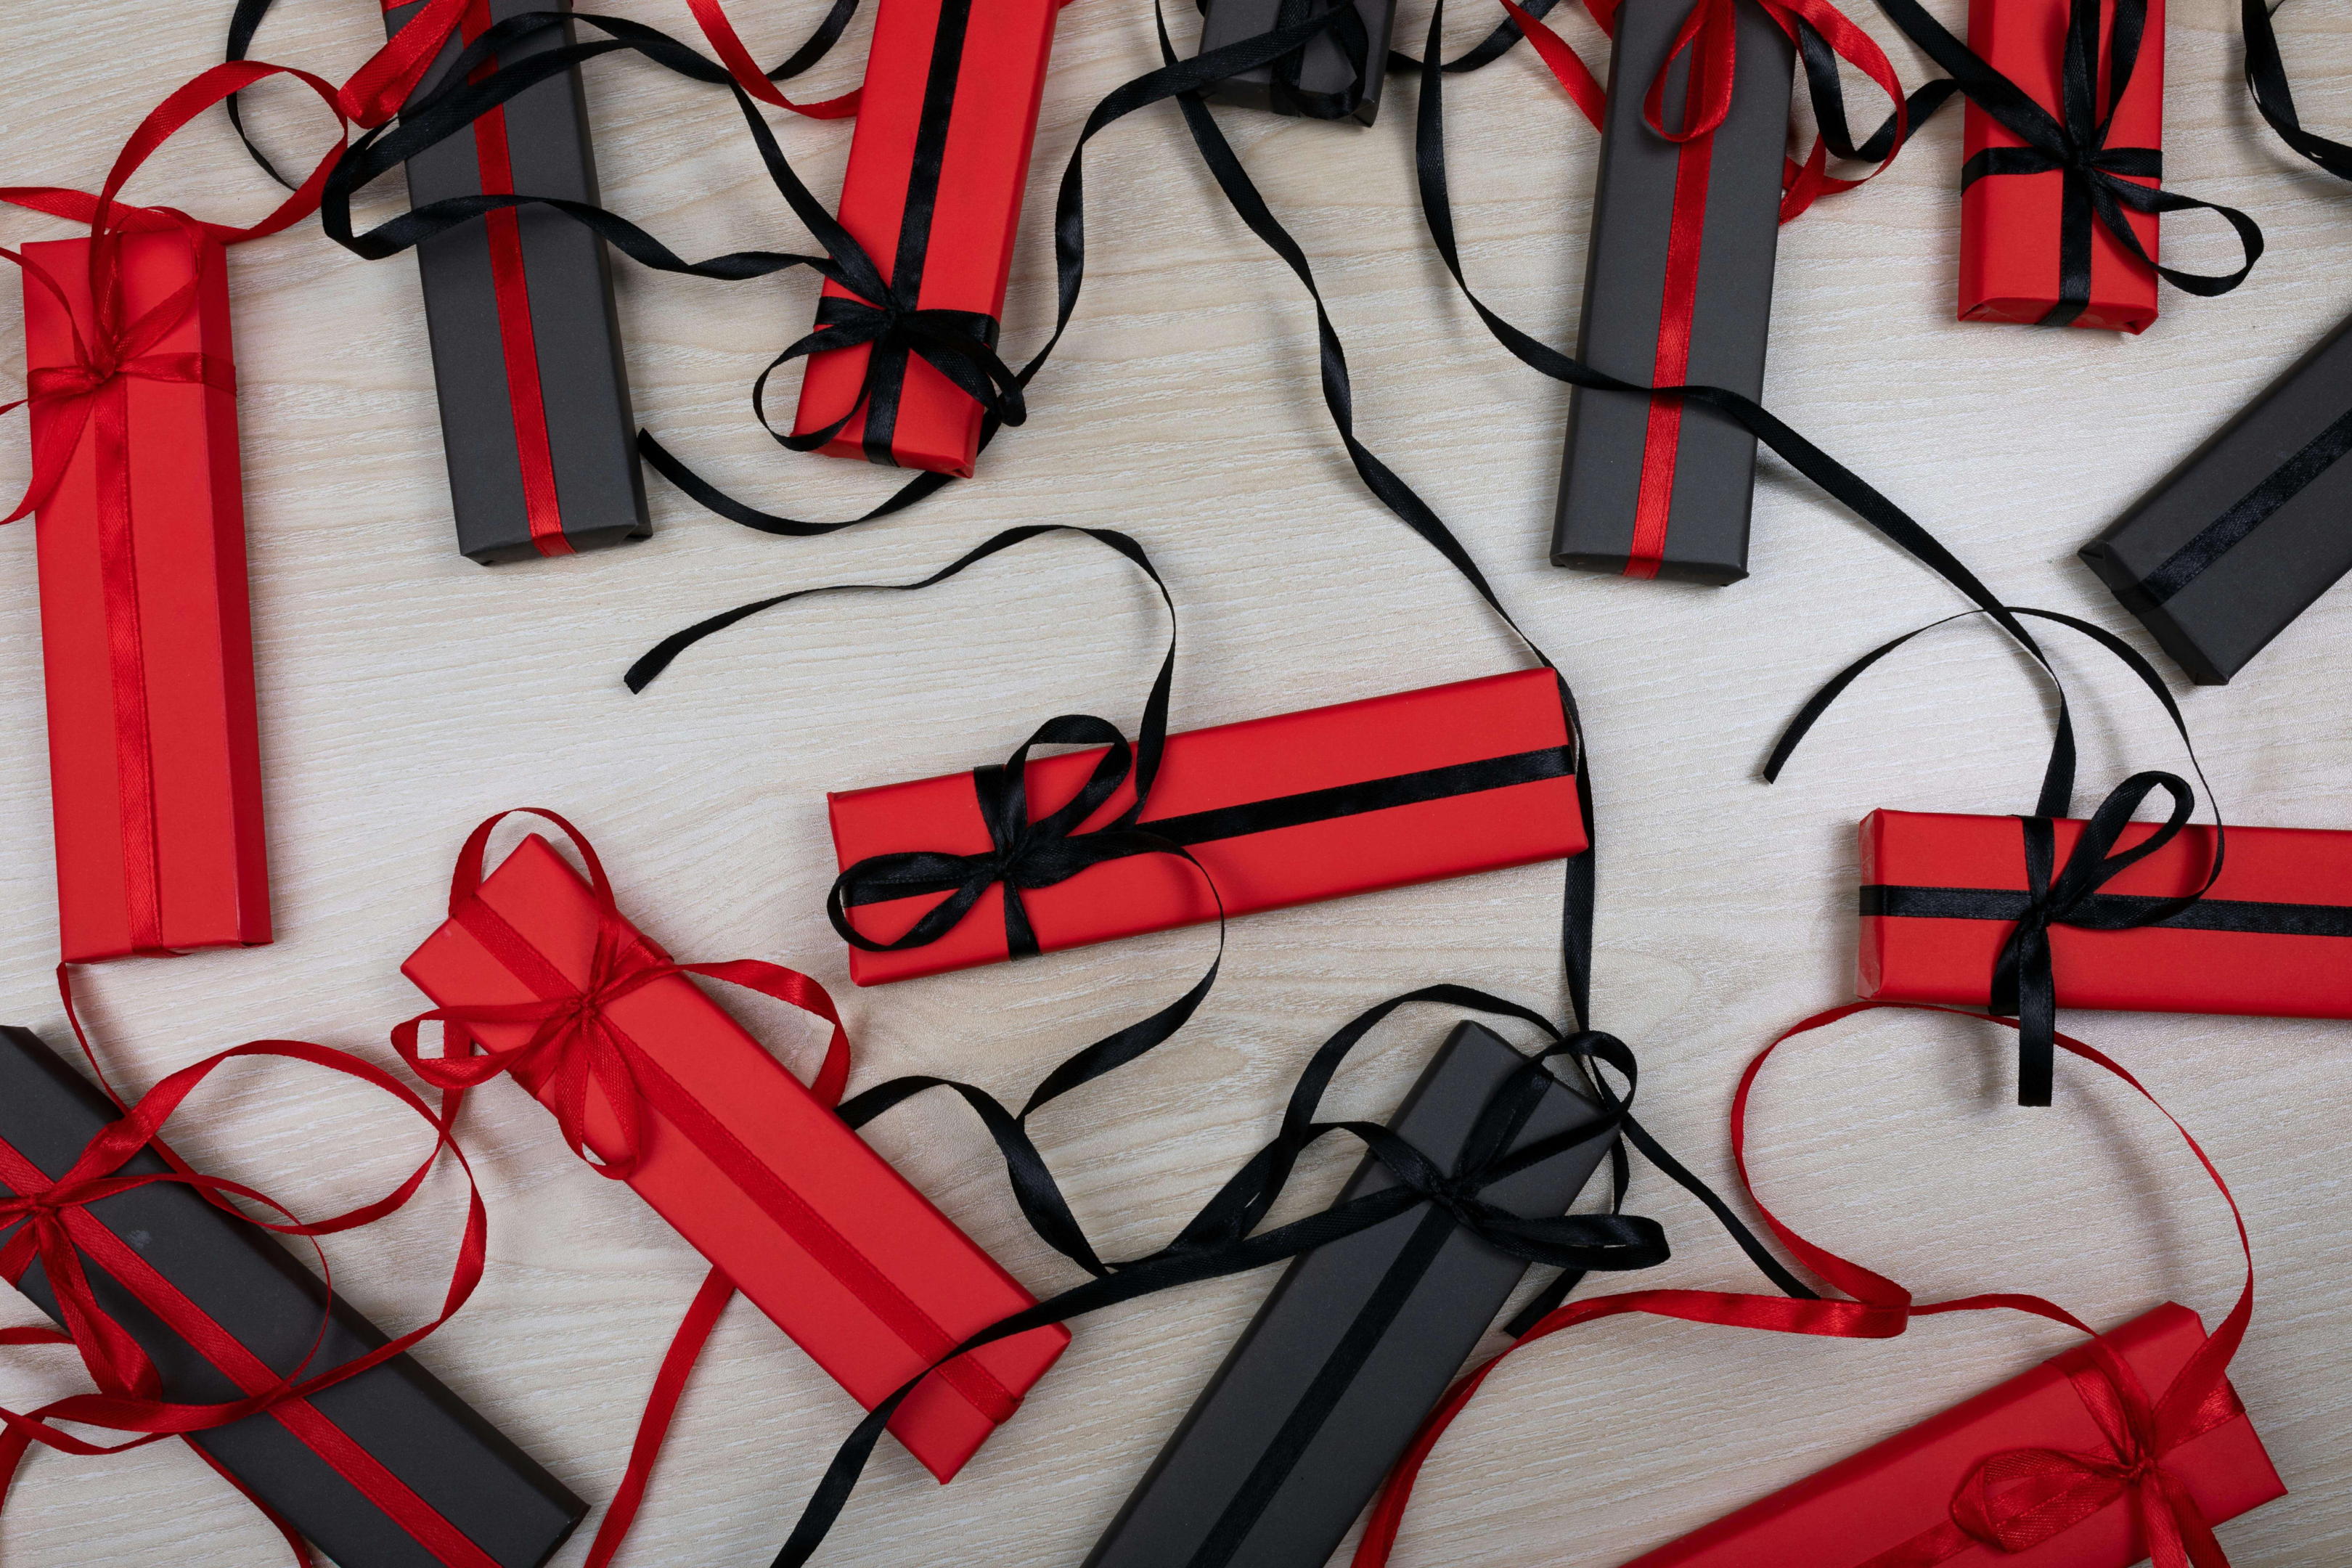 Assortment of red and black gift boxes with elegant ribbons on a wooden surface.